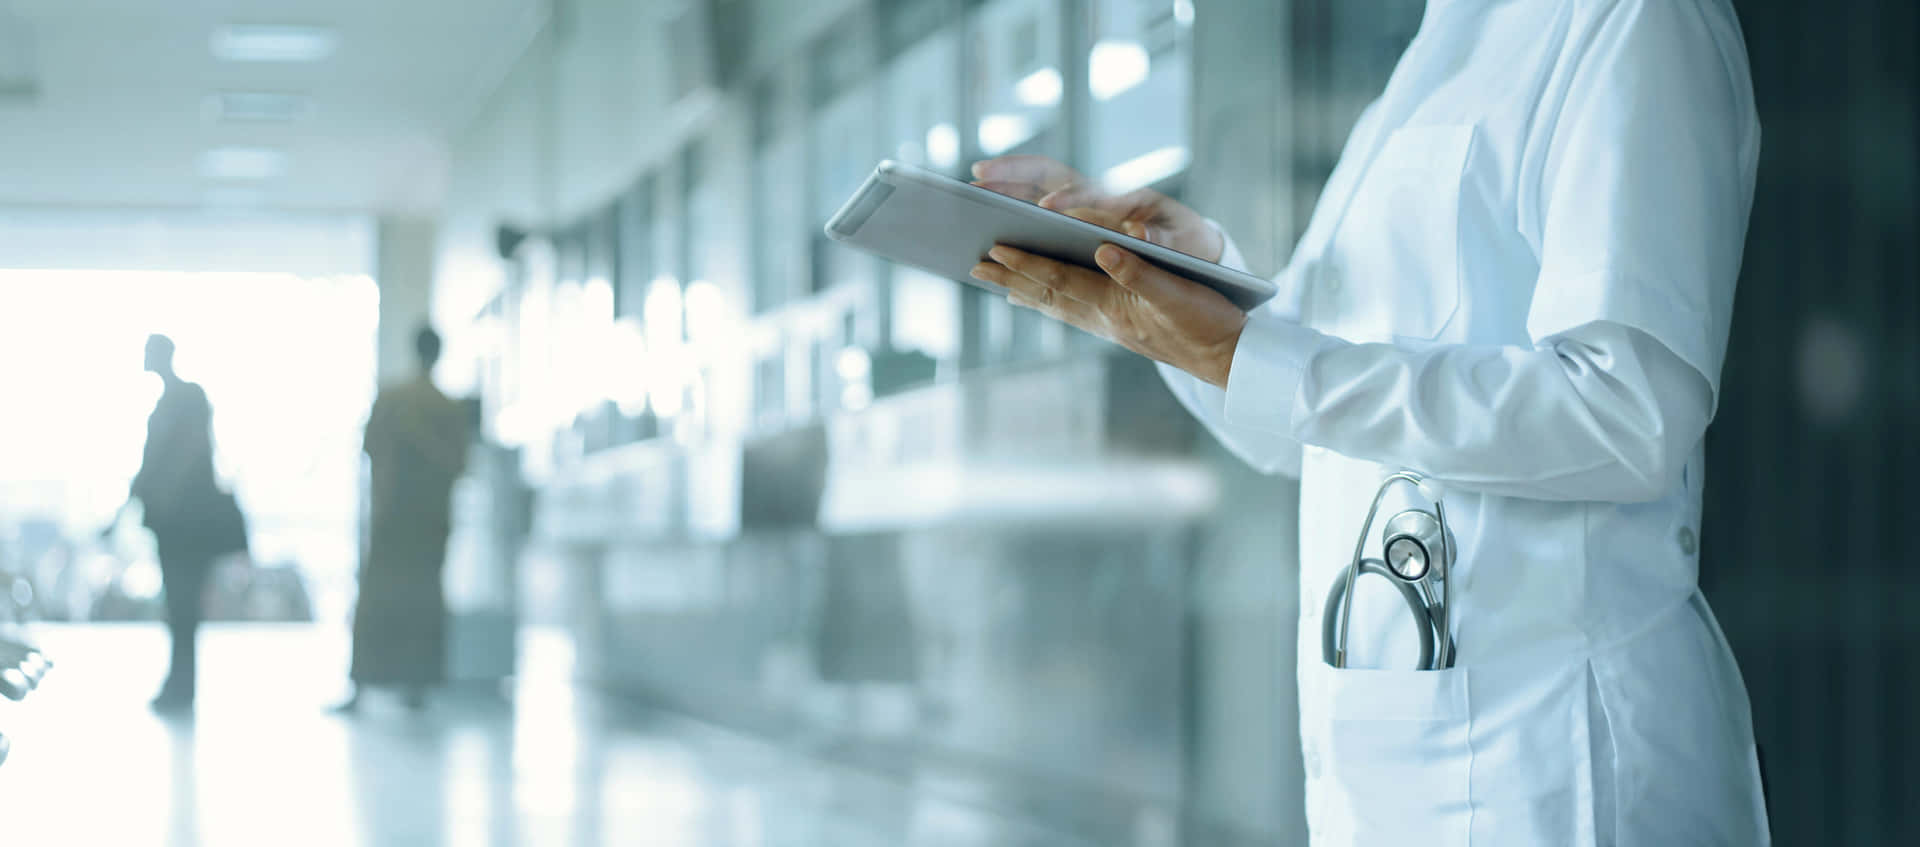 A Nurse Is Holding A Tablet In A Hallway